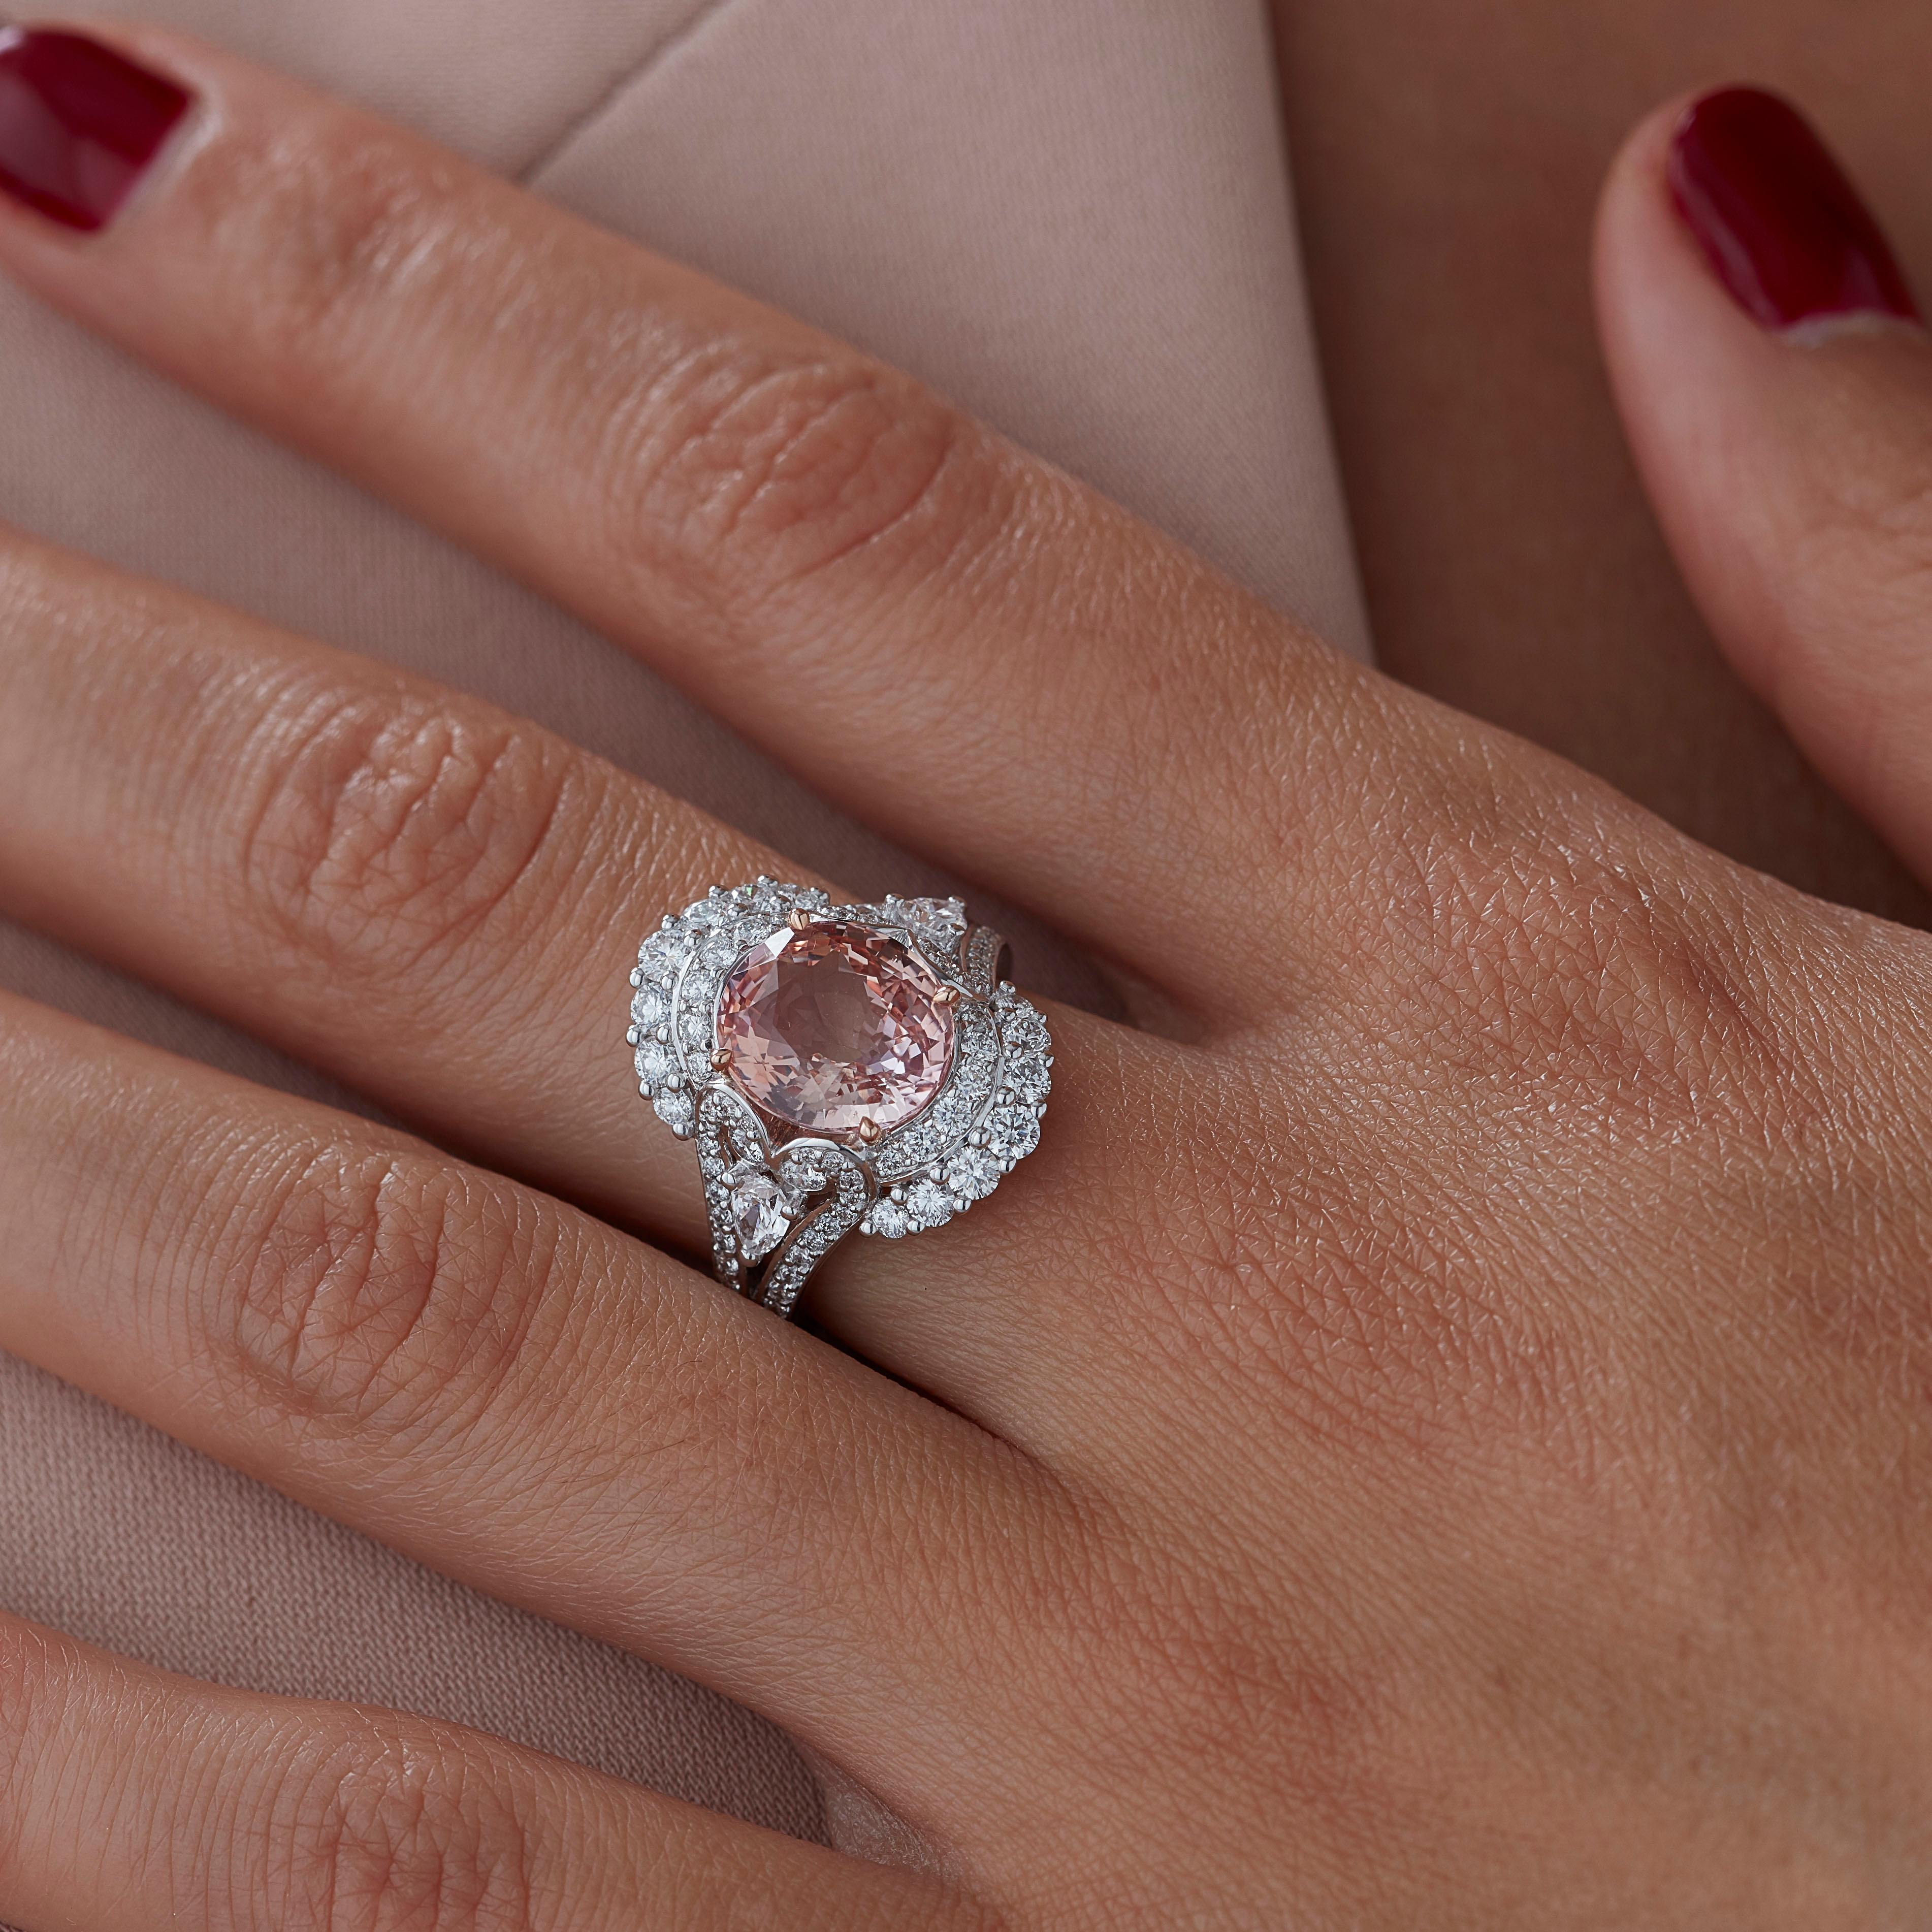 A House of Garrard 18 karat white gold 'Jewelled Vault' ring, set with a central oval padparadscha sapphire and round and pearshape white diamonds.

1 oval padparadscha sapphire weighing: 5.54cts 
GRS certified, Sri Lanka, Orange-Pink, Unheated
86